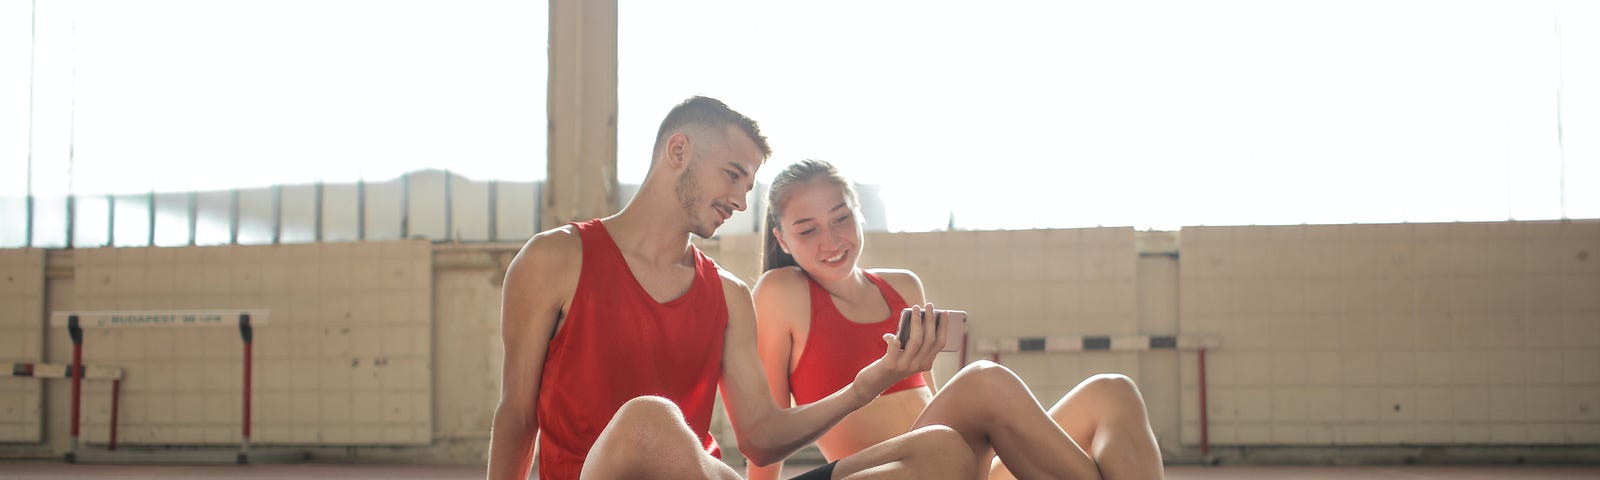 Fit man and woman looking at social media on a mobile phone